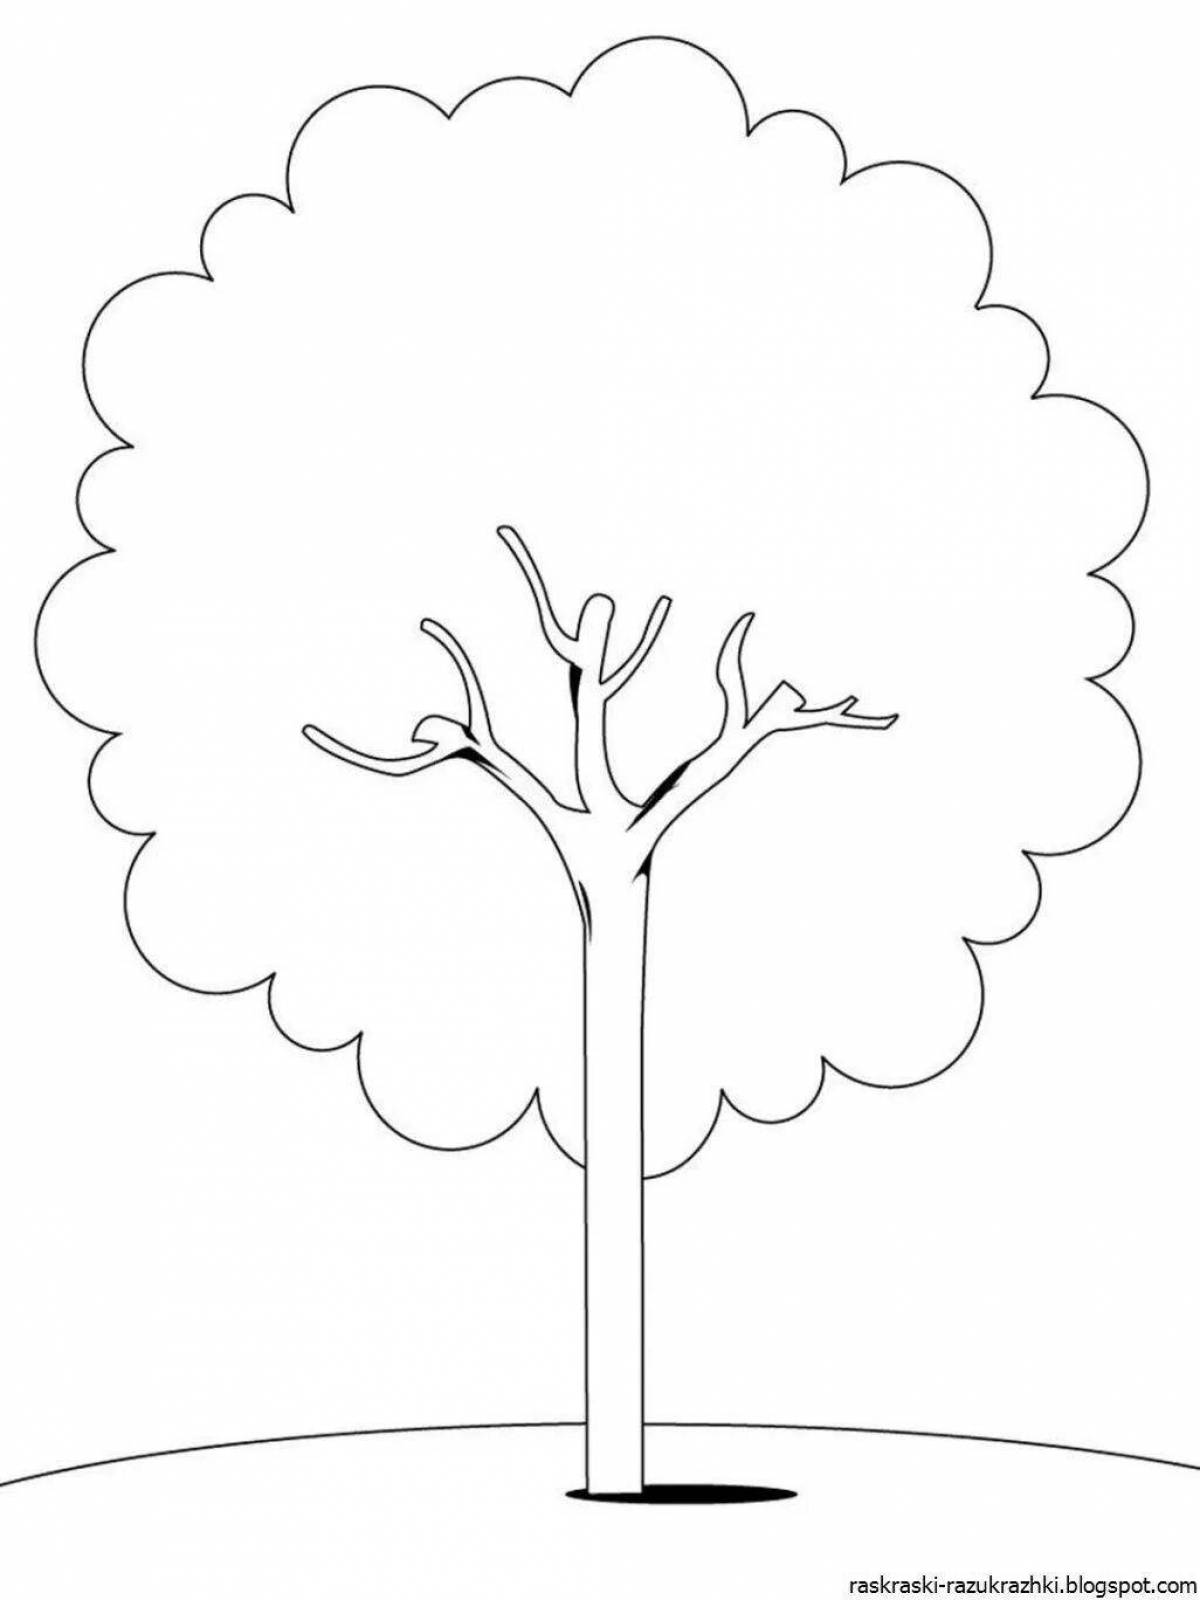 Coloring tree colorful pattern for kids